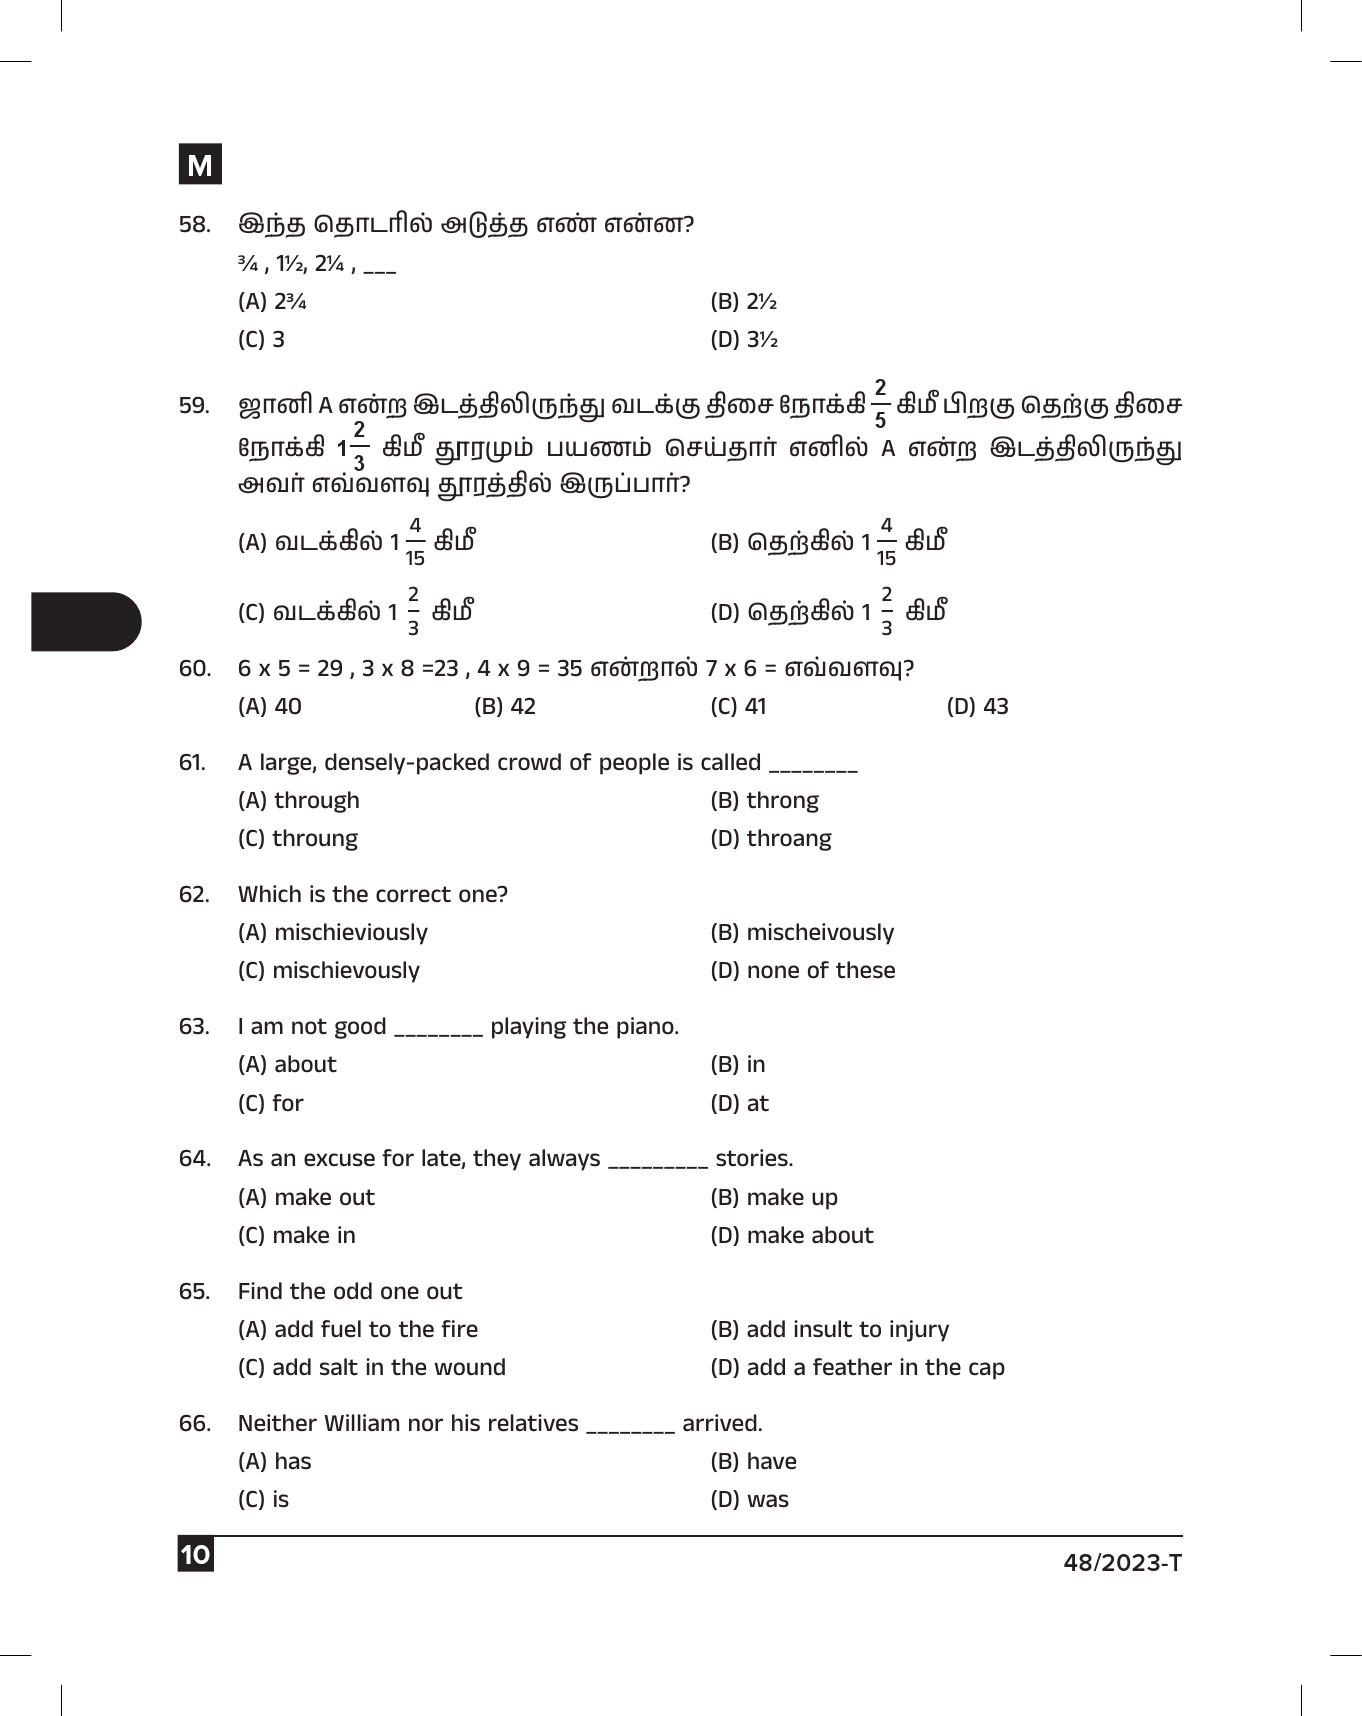 KPSC Fire and Rescue Officer Tamil Exam 2023 Code 0482023 T 9